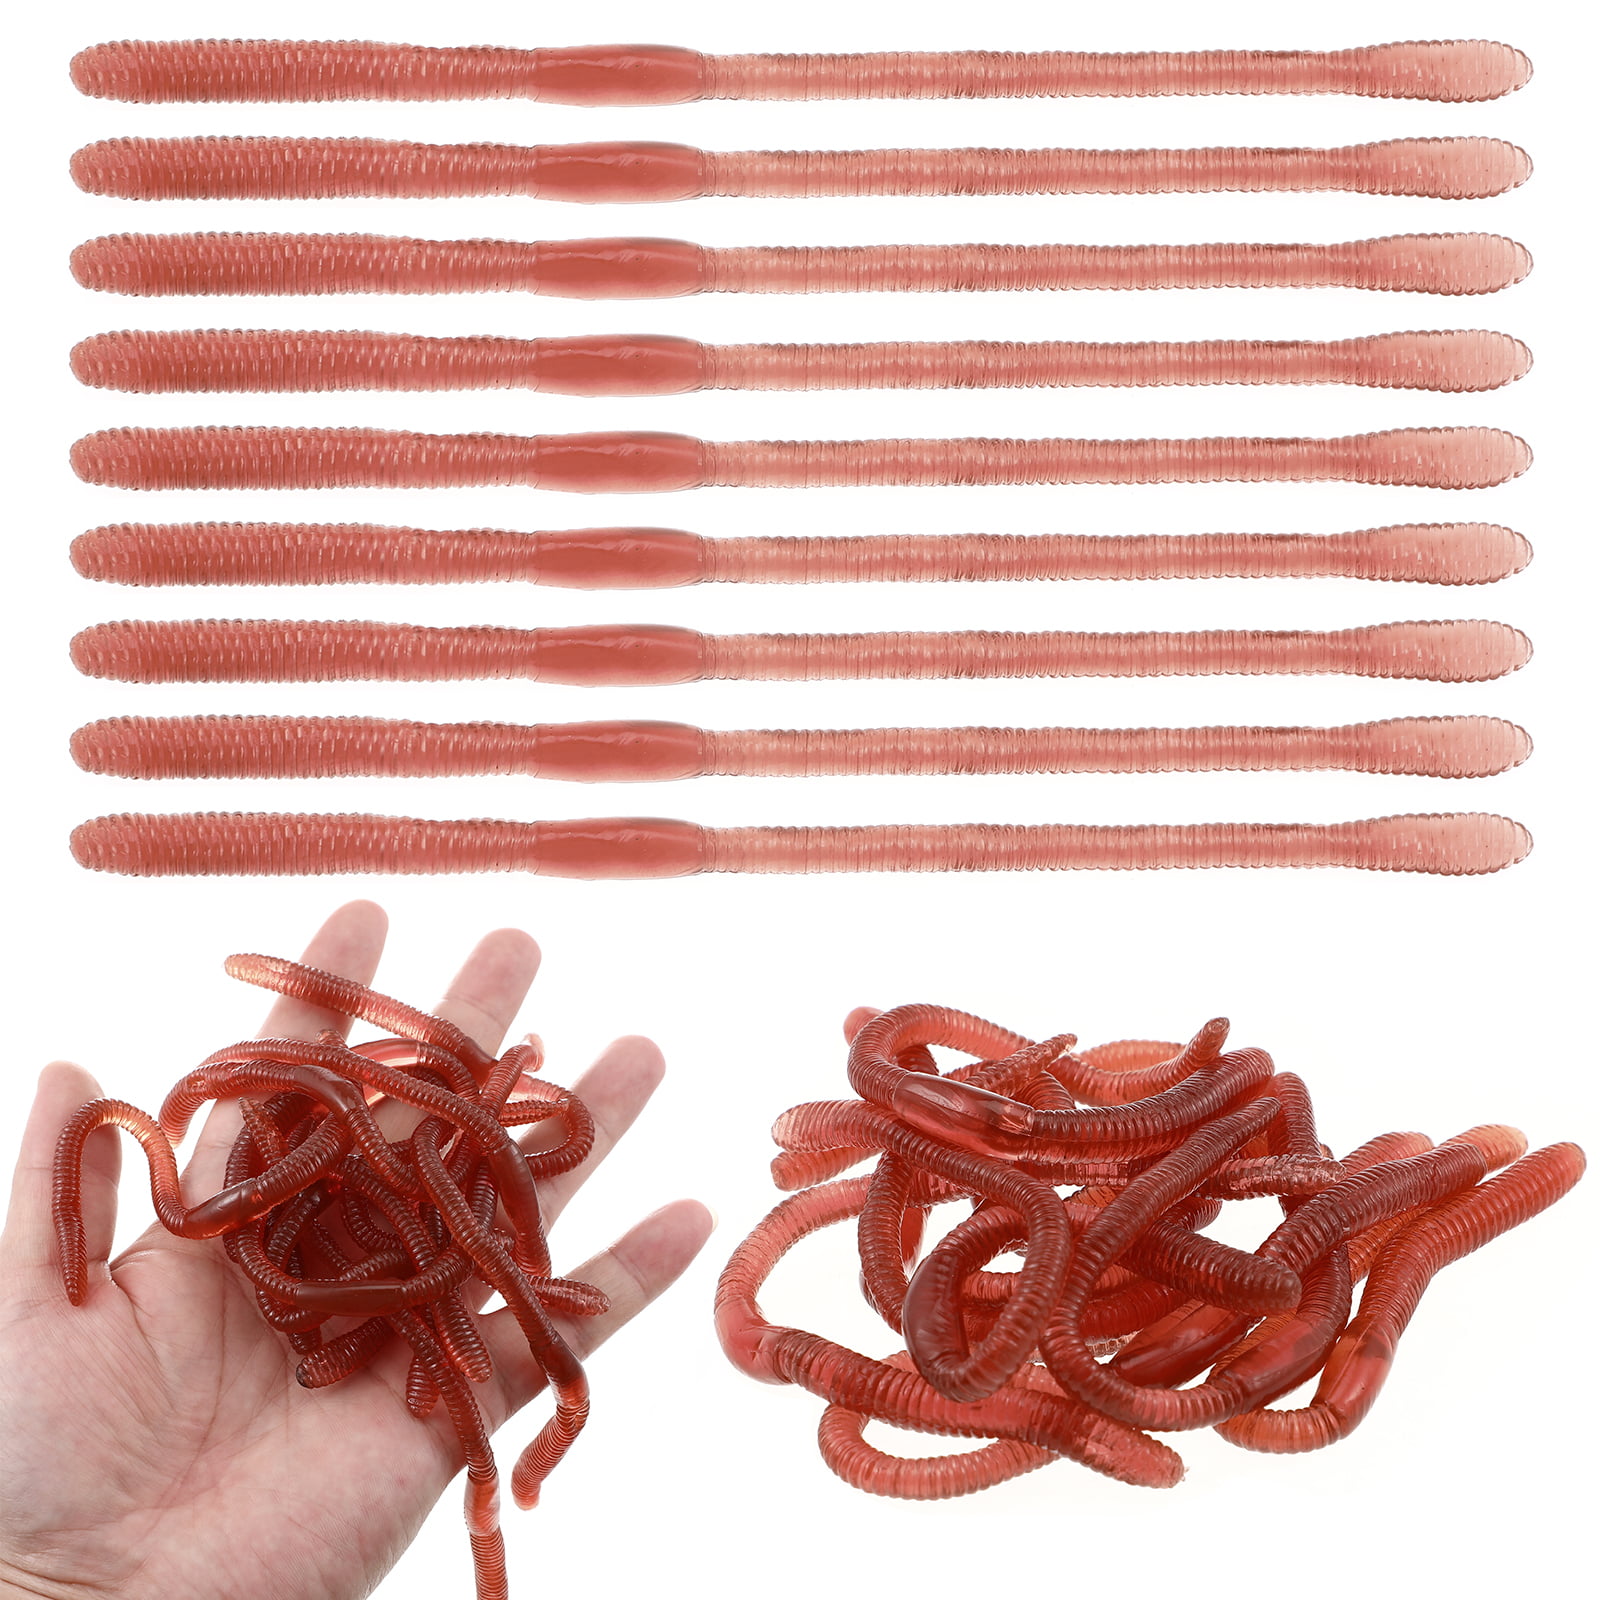 Artificial Earthworm 10 Pcs Fake Worms Toy Earthworms Baits Models